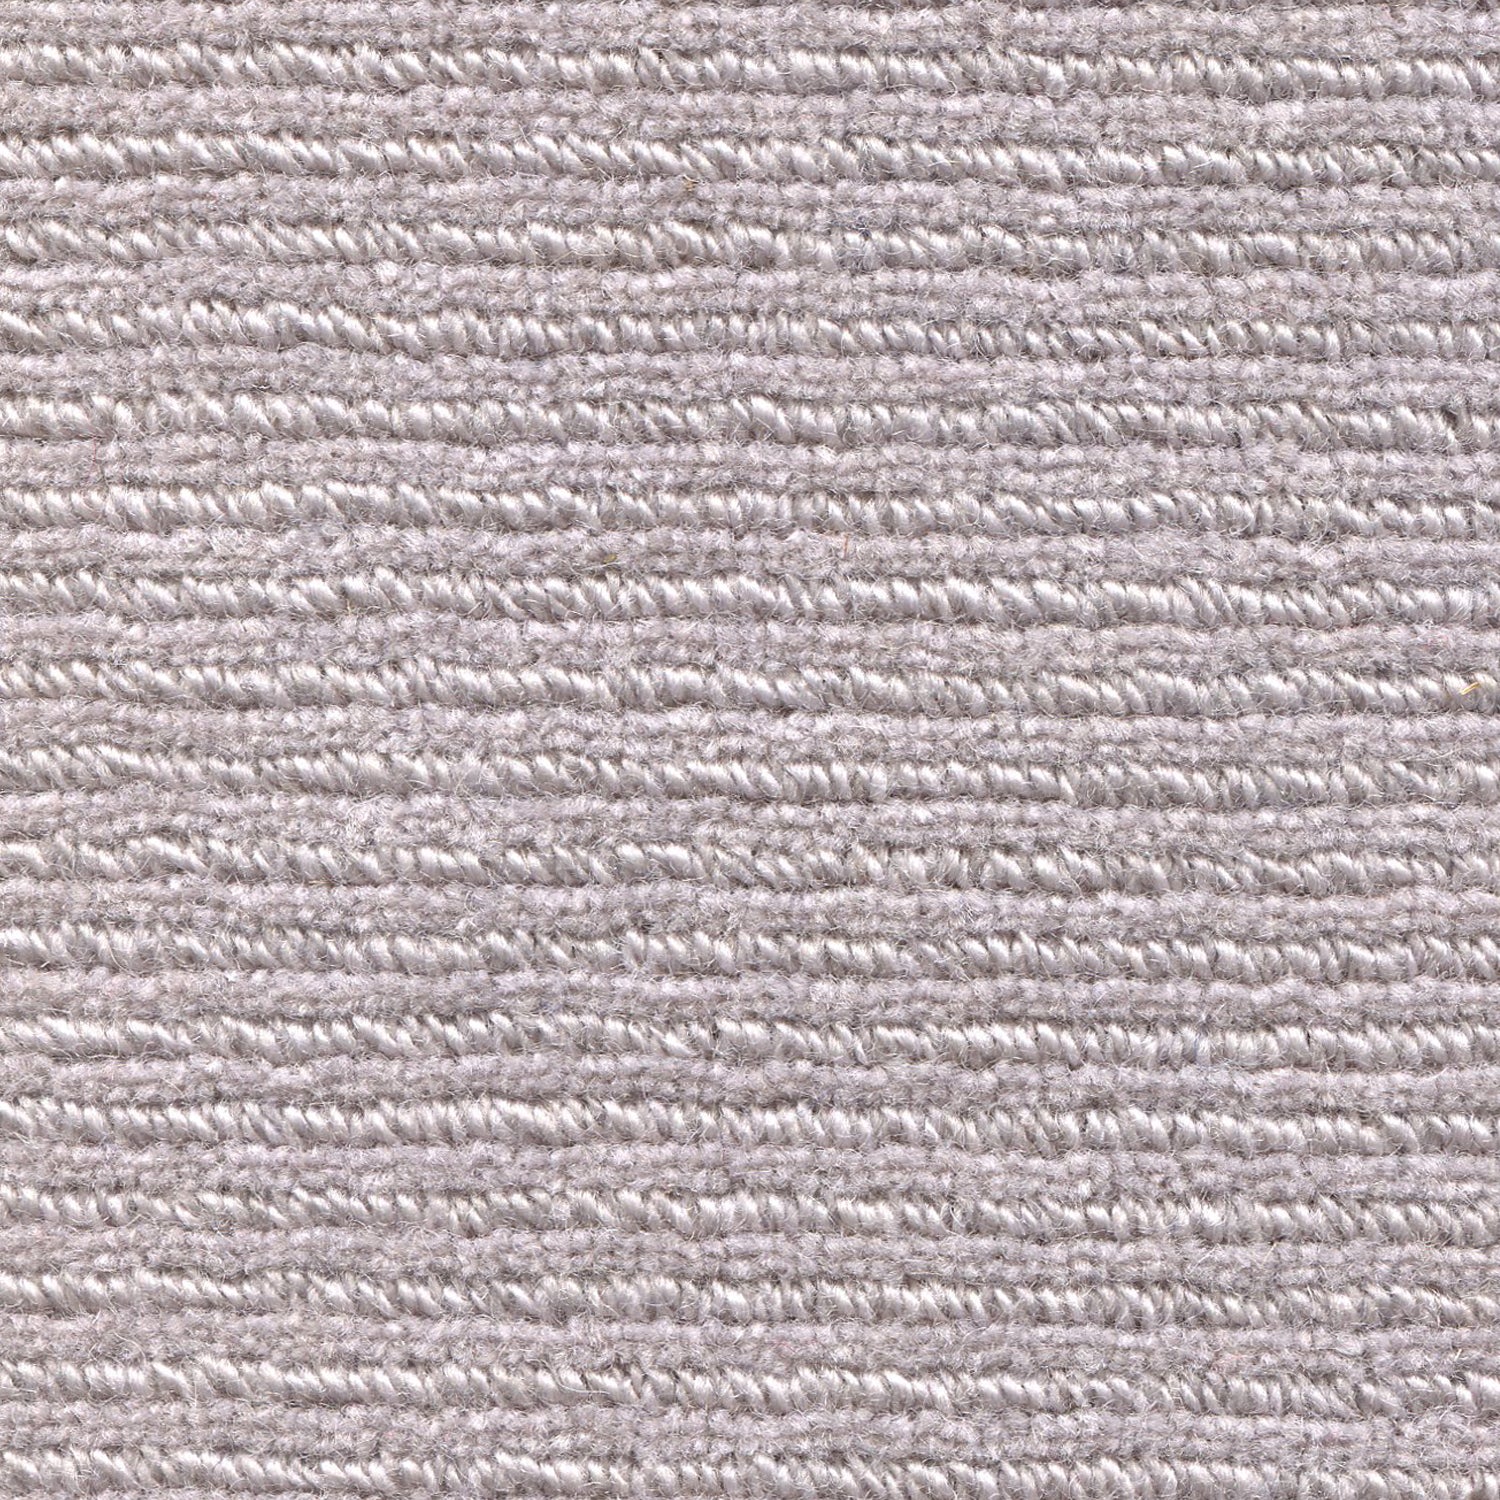 Wool broadloom carpet swatch in a chunky ribbed weave in dove gray.